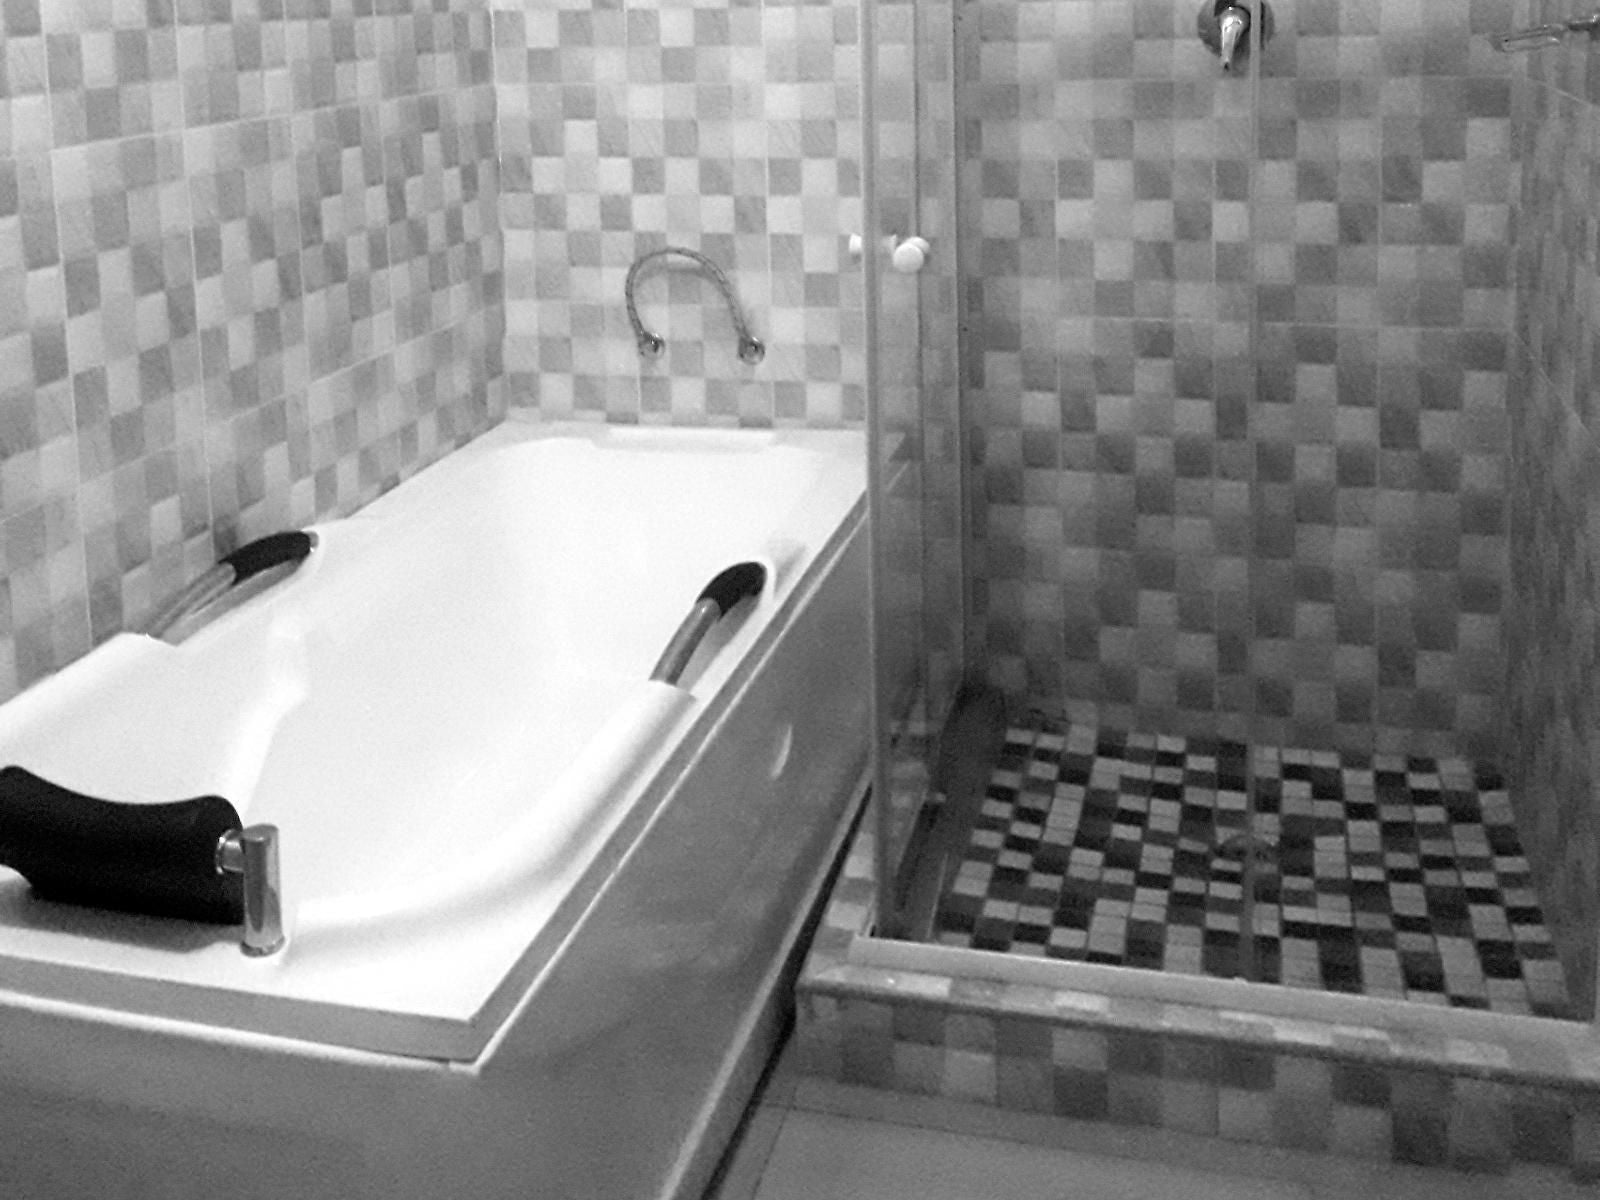 Vakhusi Bed And Breakfast Giyani Limpopo Province South Africa Colorless, Black And White, Bathroom